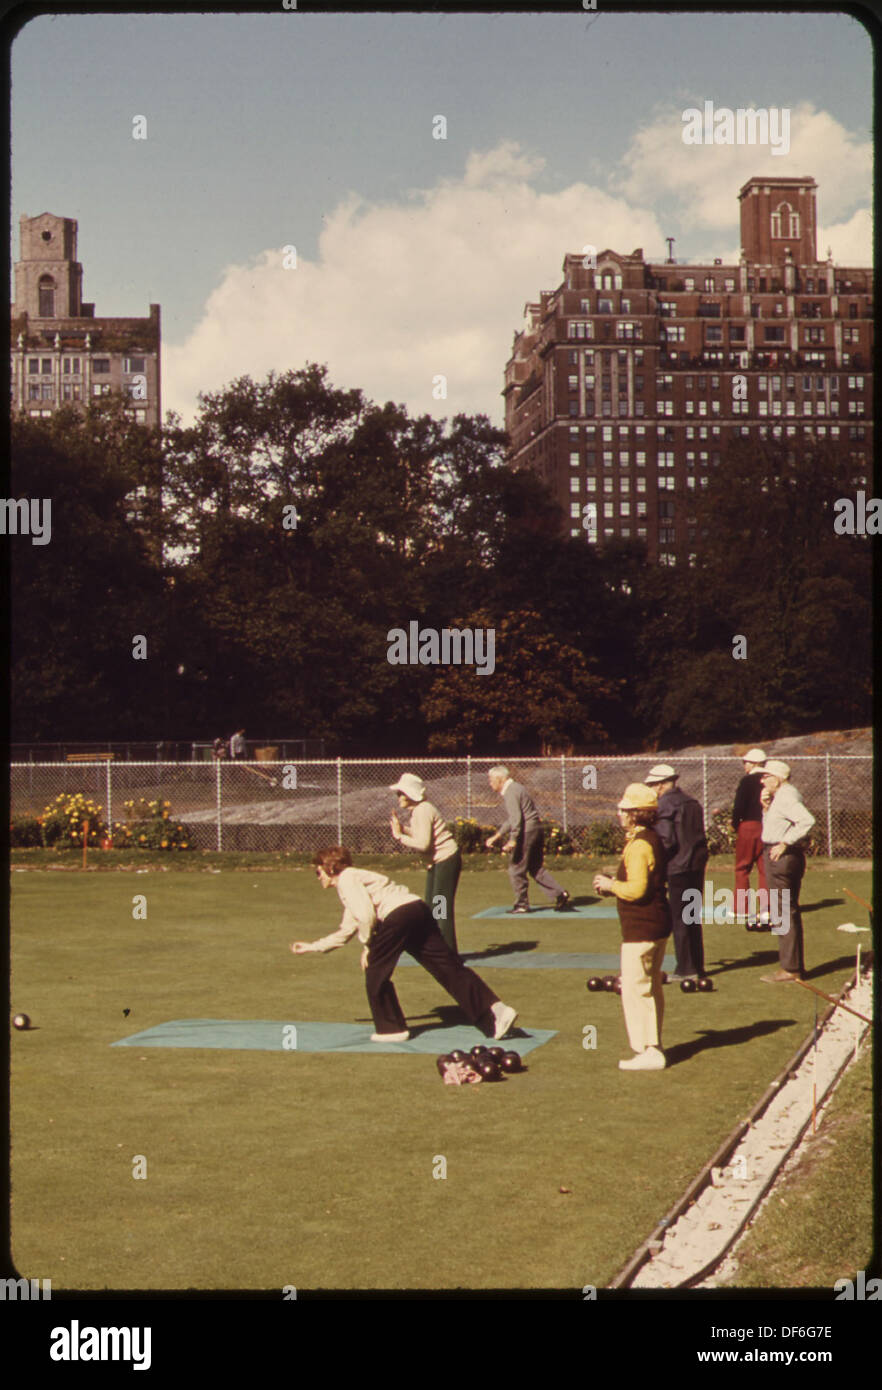 MEMBERS OF THE BOWLING GREEN BOWLING CLUB MEET FOR A GAME IN CENTRAL PARK. THE NEW YORK CITY DEPARTMENT OF PARKS... 551760 Stock Photo